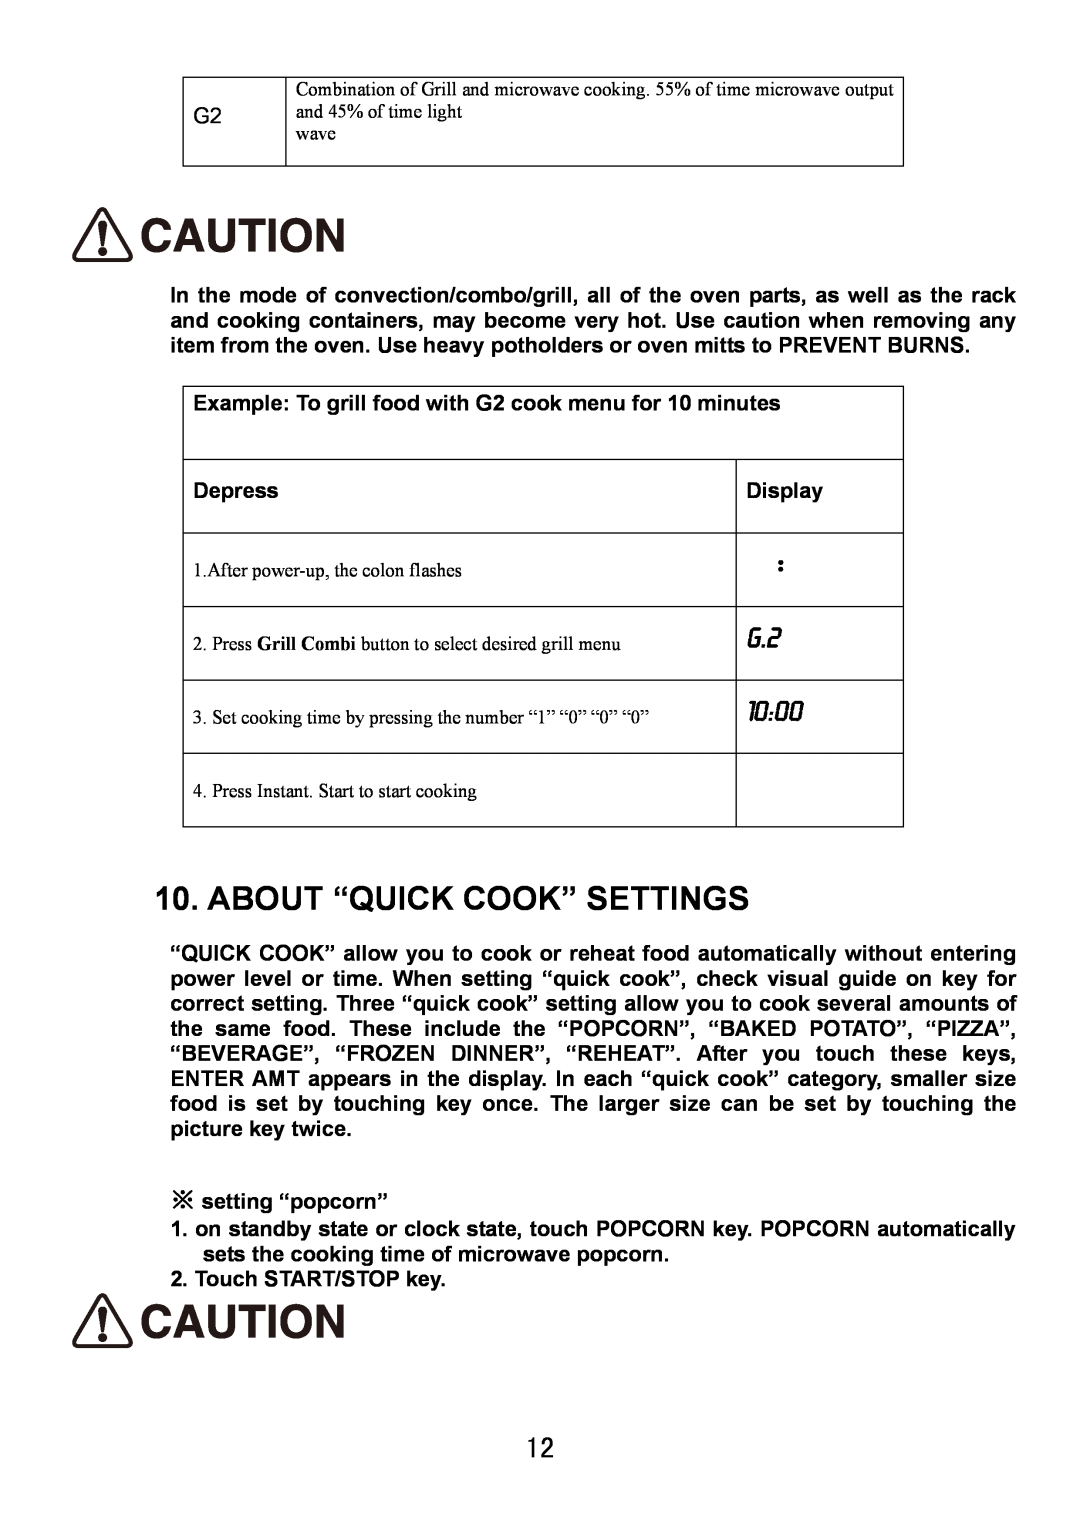 Haier HDM-2070EG manual About “Quick Cook” Settings, 1000 